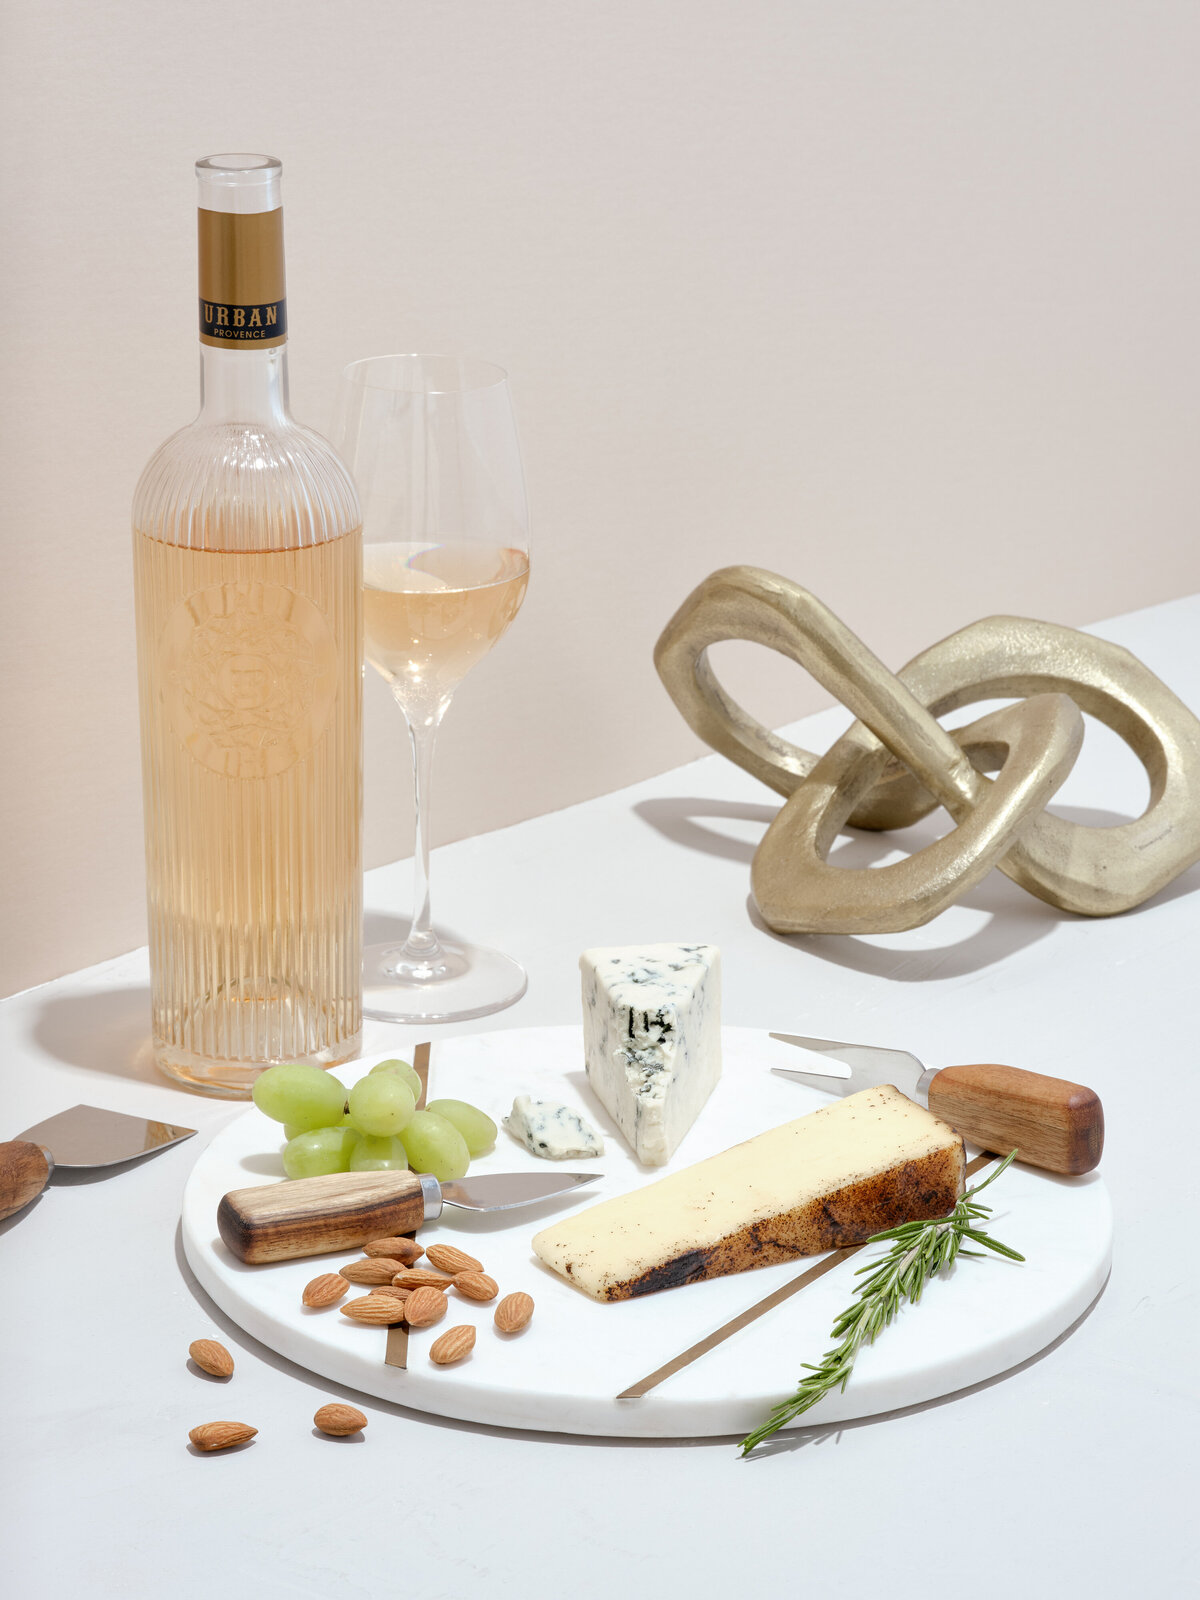 A charcuterie board with a bottle and glass of wine